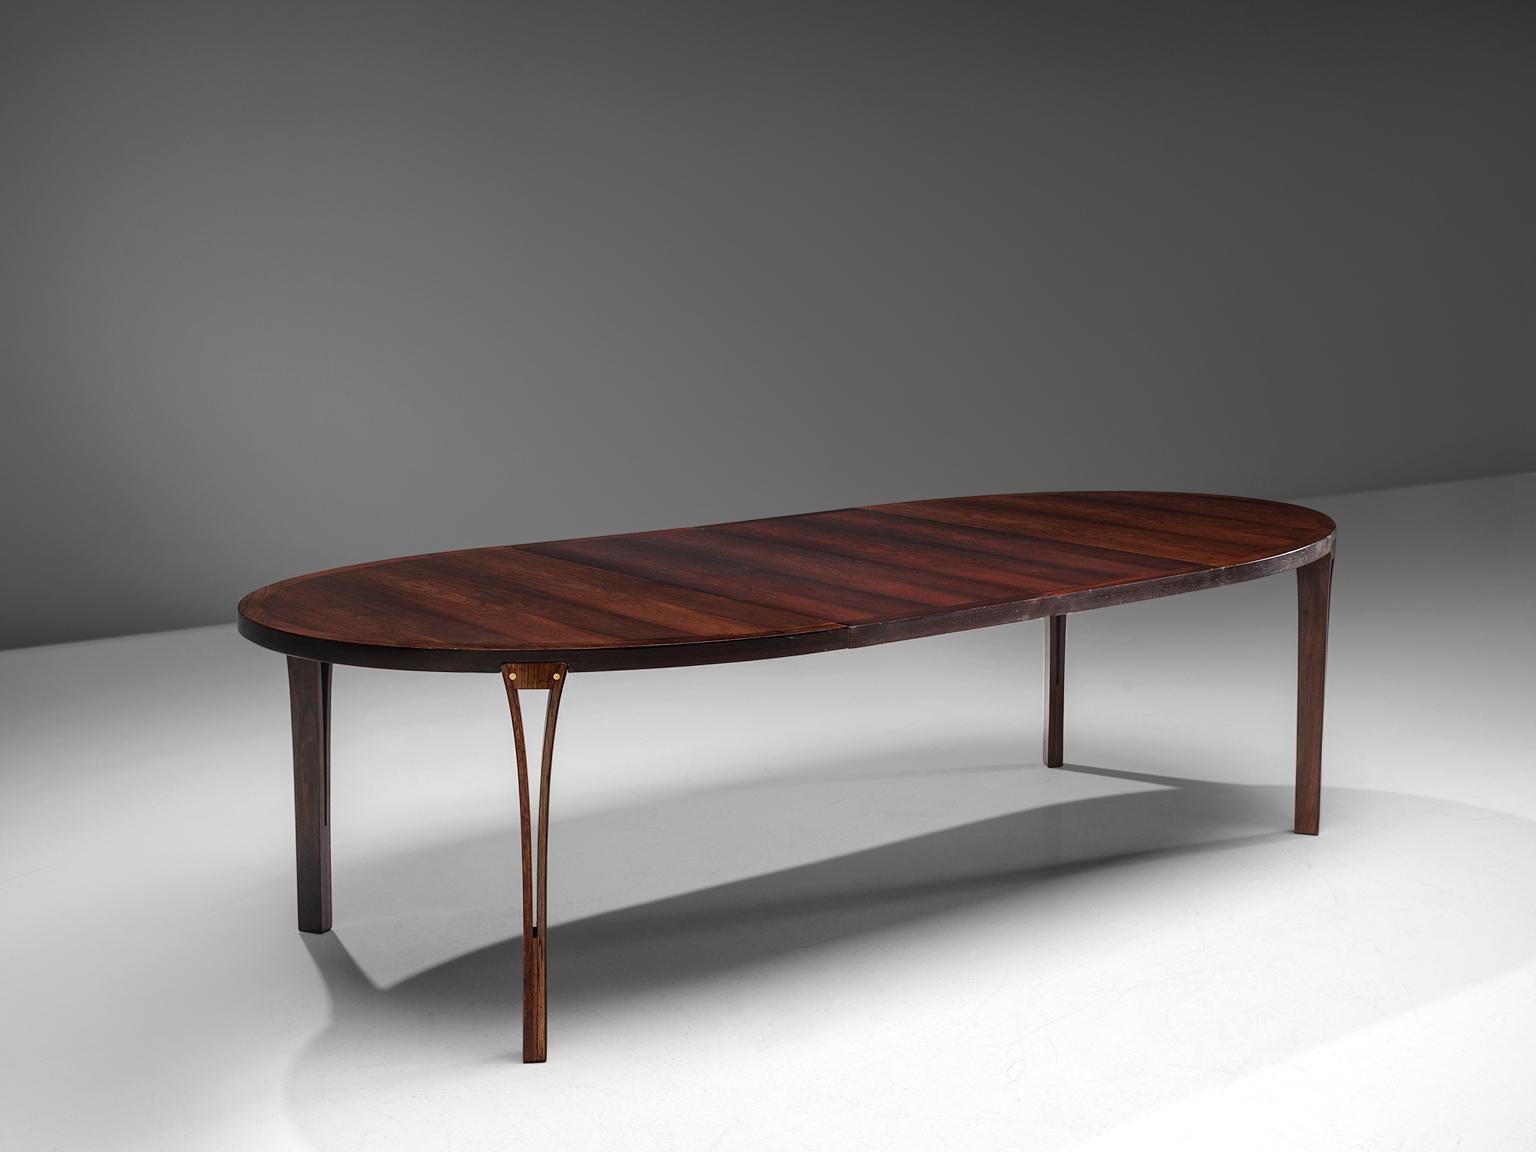 Dining table, rosewood, brass, Denmark, 1960s.

This exceptional dining table with extension leaves features four tapered circular legs beautifully spared into the plinth. The top shows an expressive rosewood grain, which gives it a warm look. The